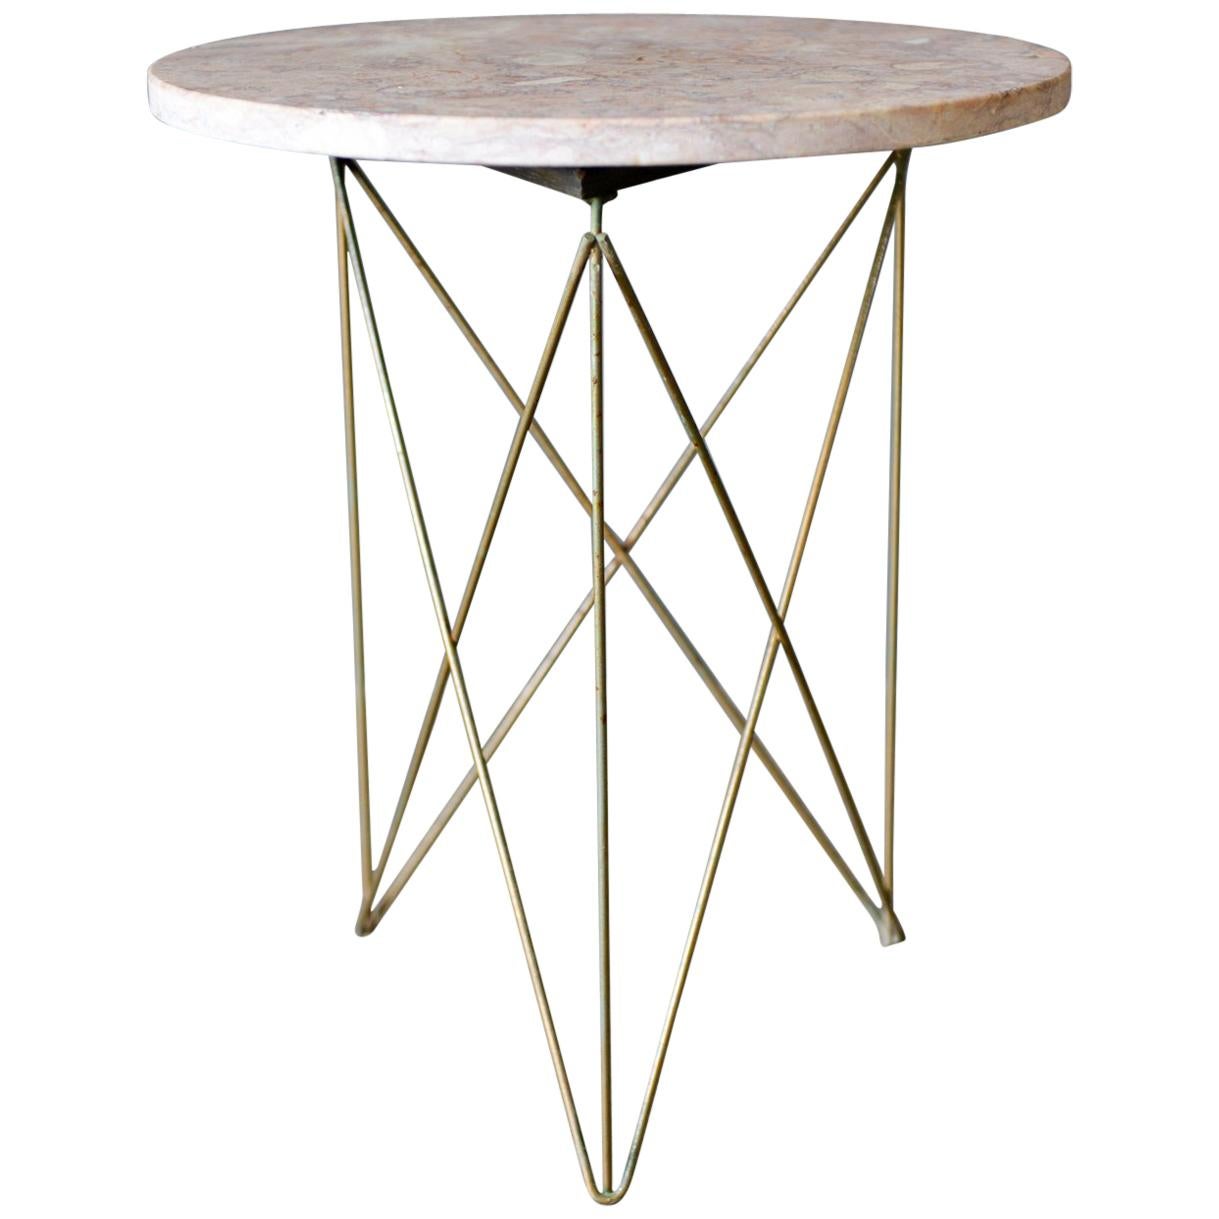 Martin Perfit for Rene Brancusi Stone and Brass Occasional Table, circa 1955